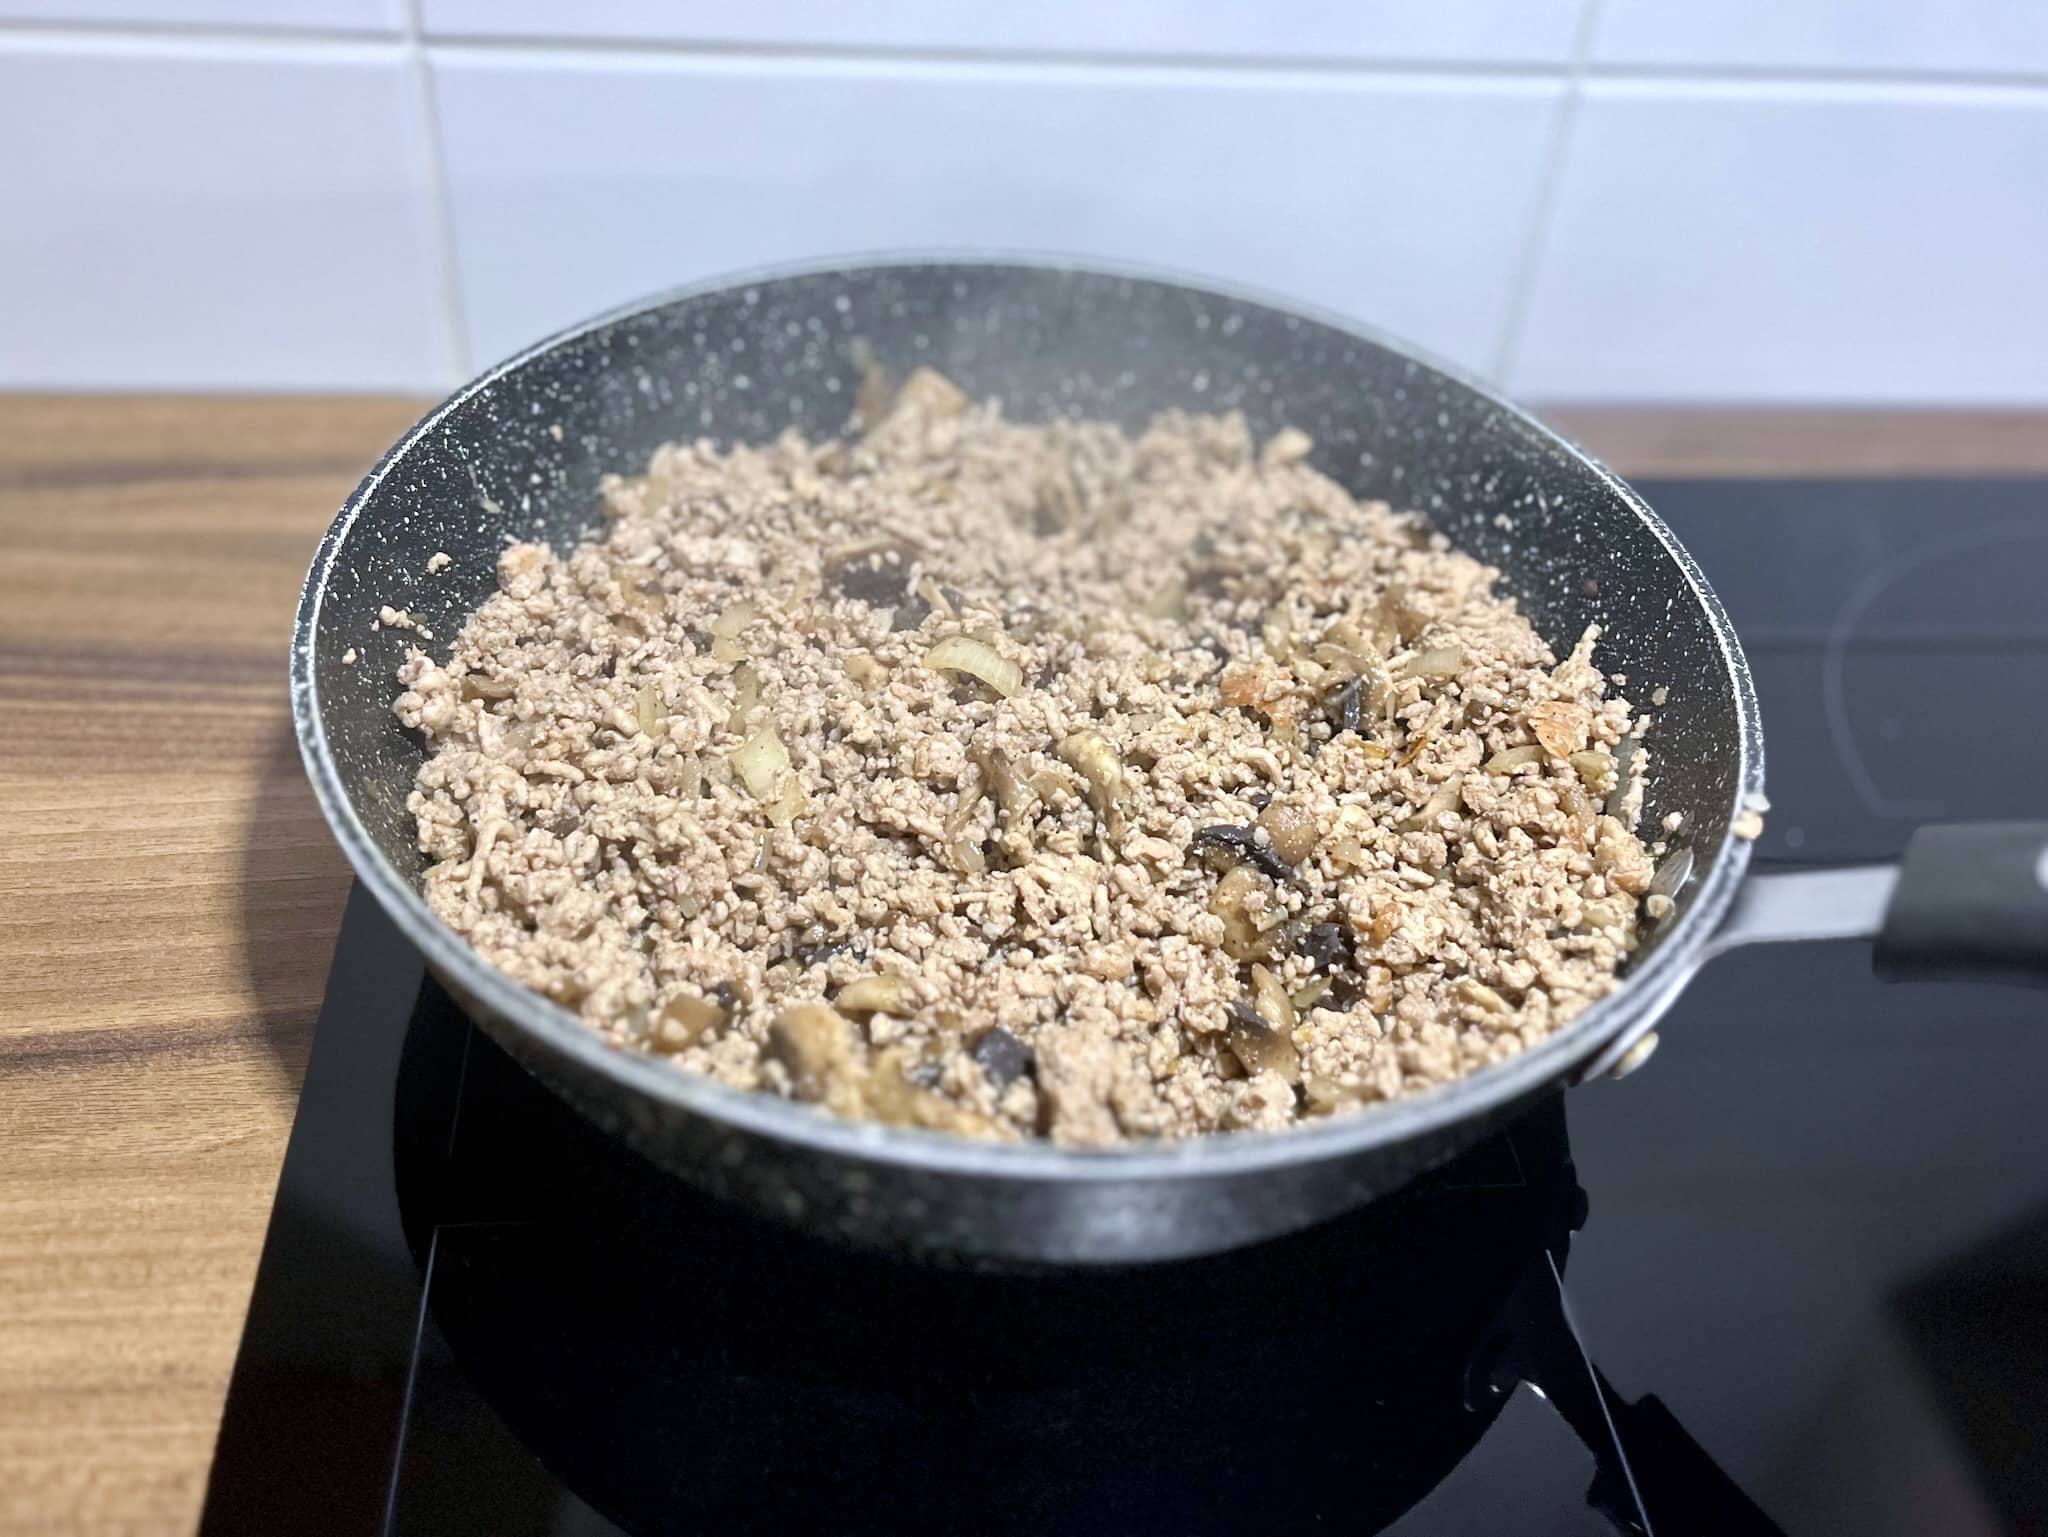 Cooked minced pork with onion, garlic and mushrooms